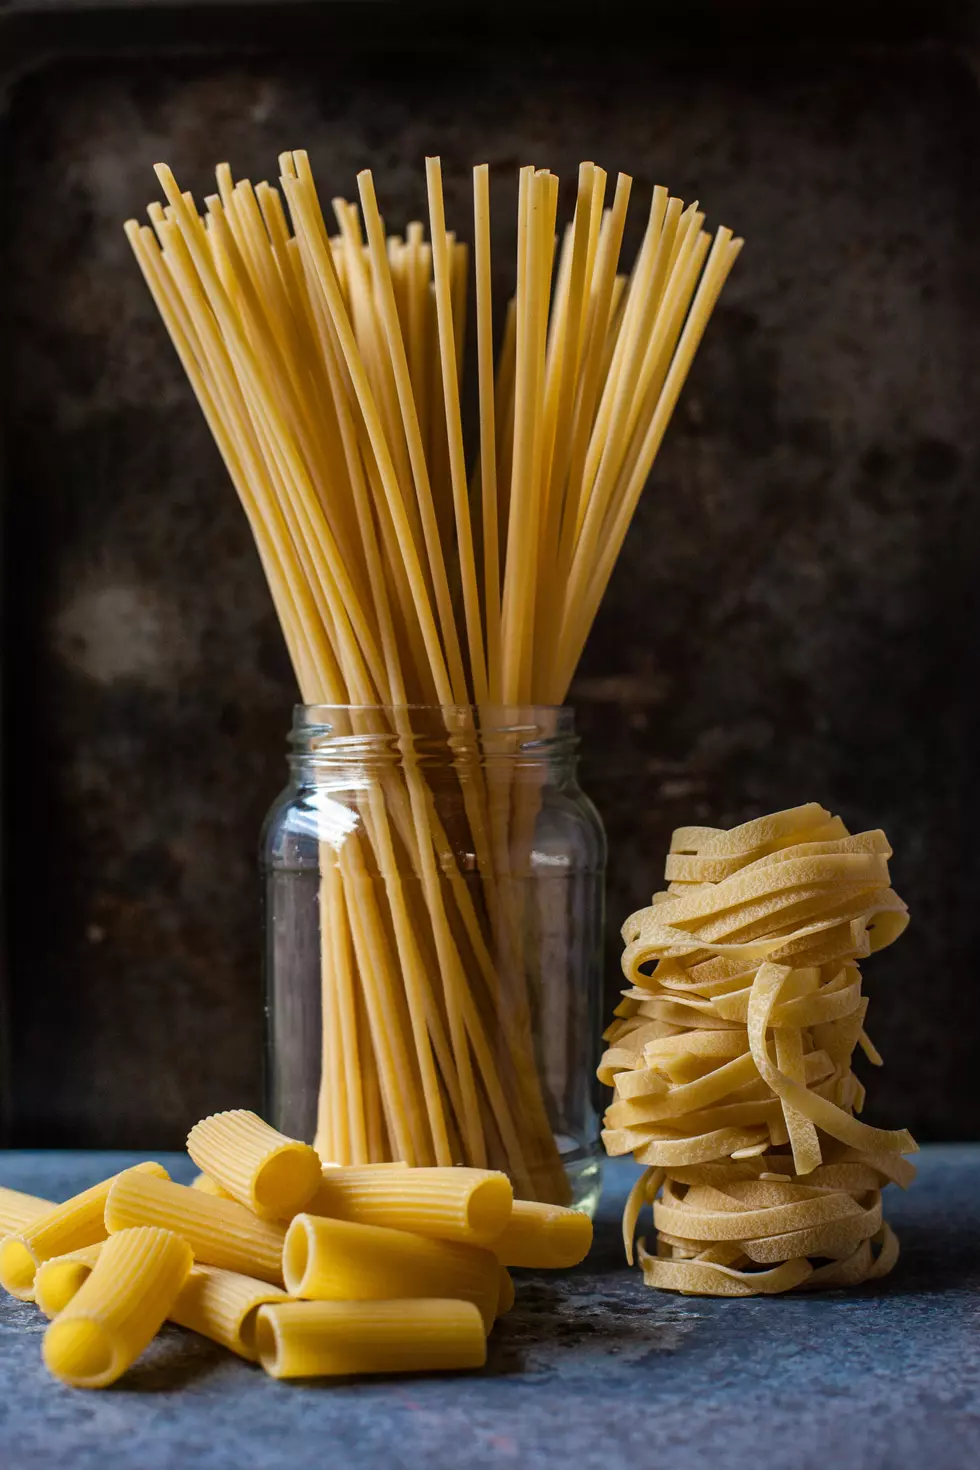 Does Idaho Hate Pasta? It Sure Seems That Way